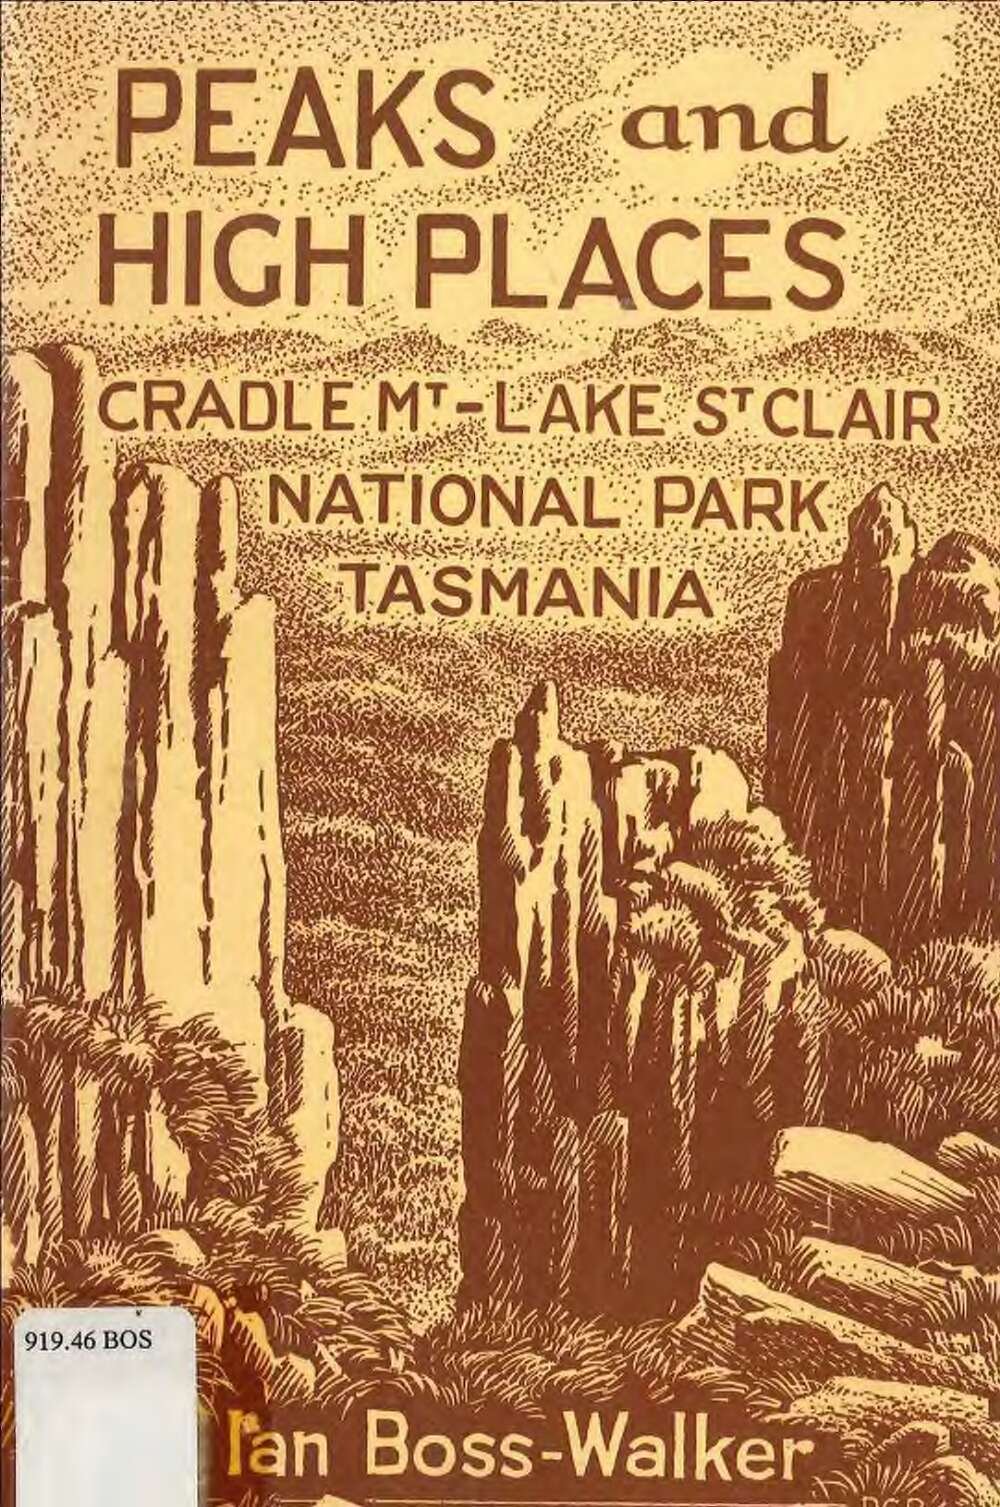 Book cover featuring a drawn representation of a mountain; text reads 'Peaks and High Places'